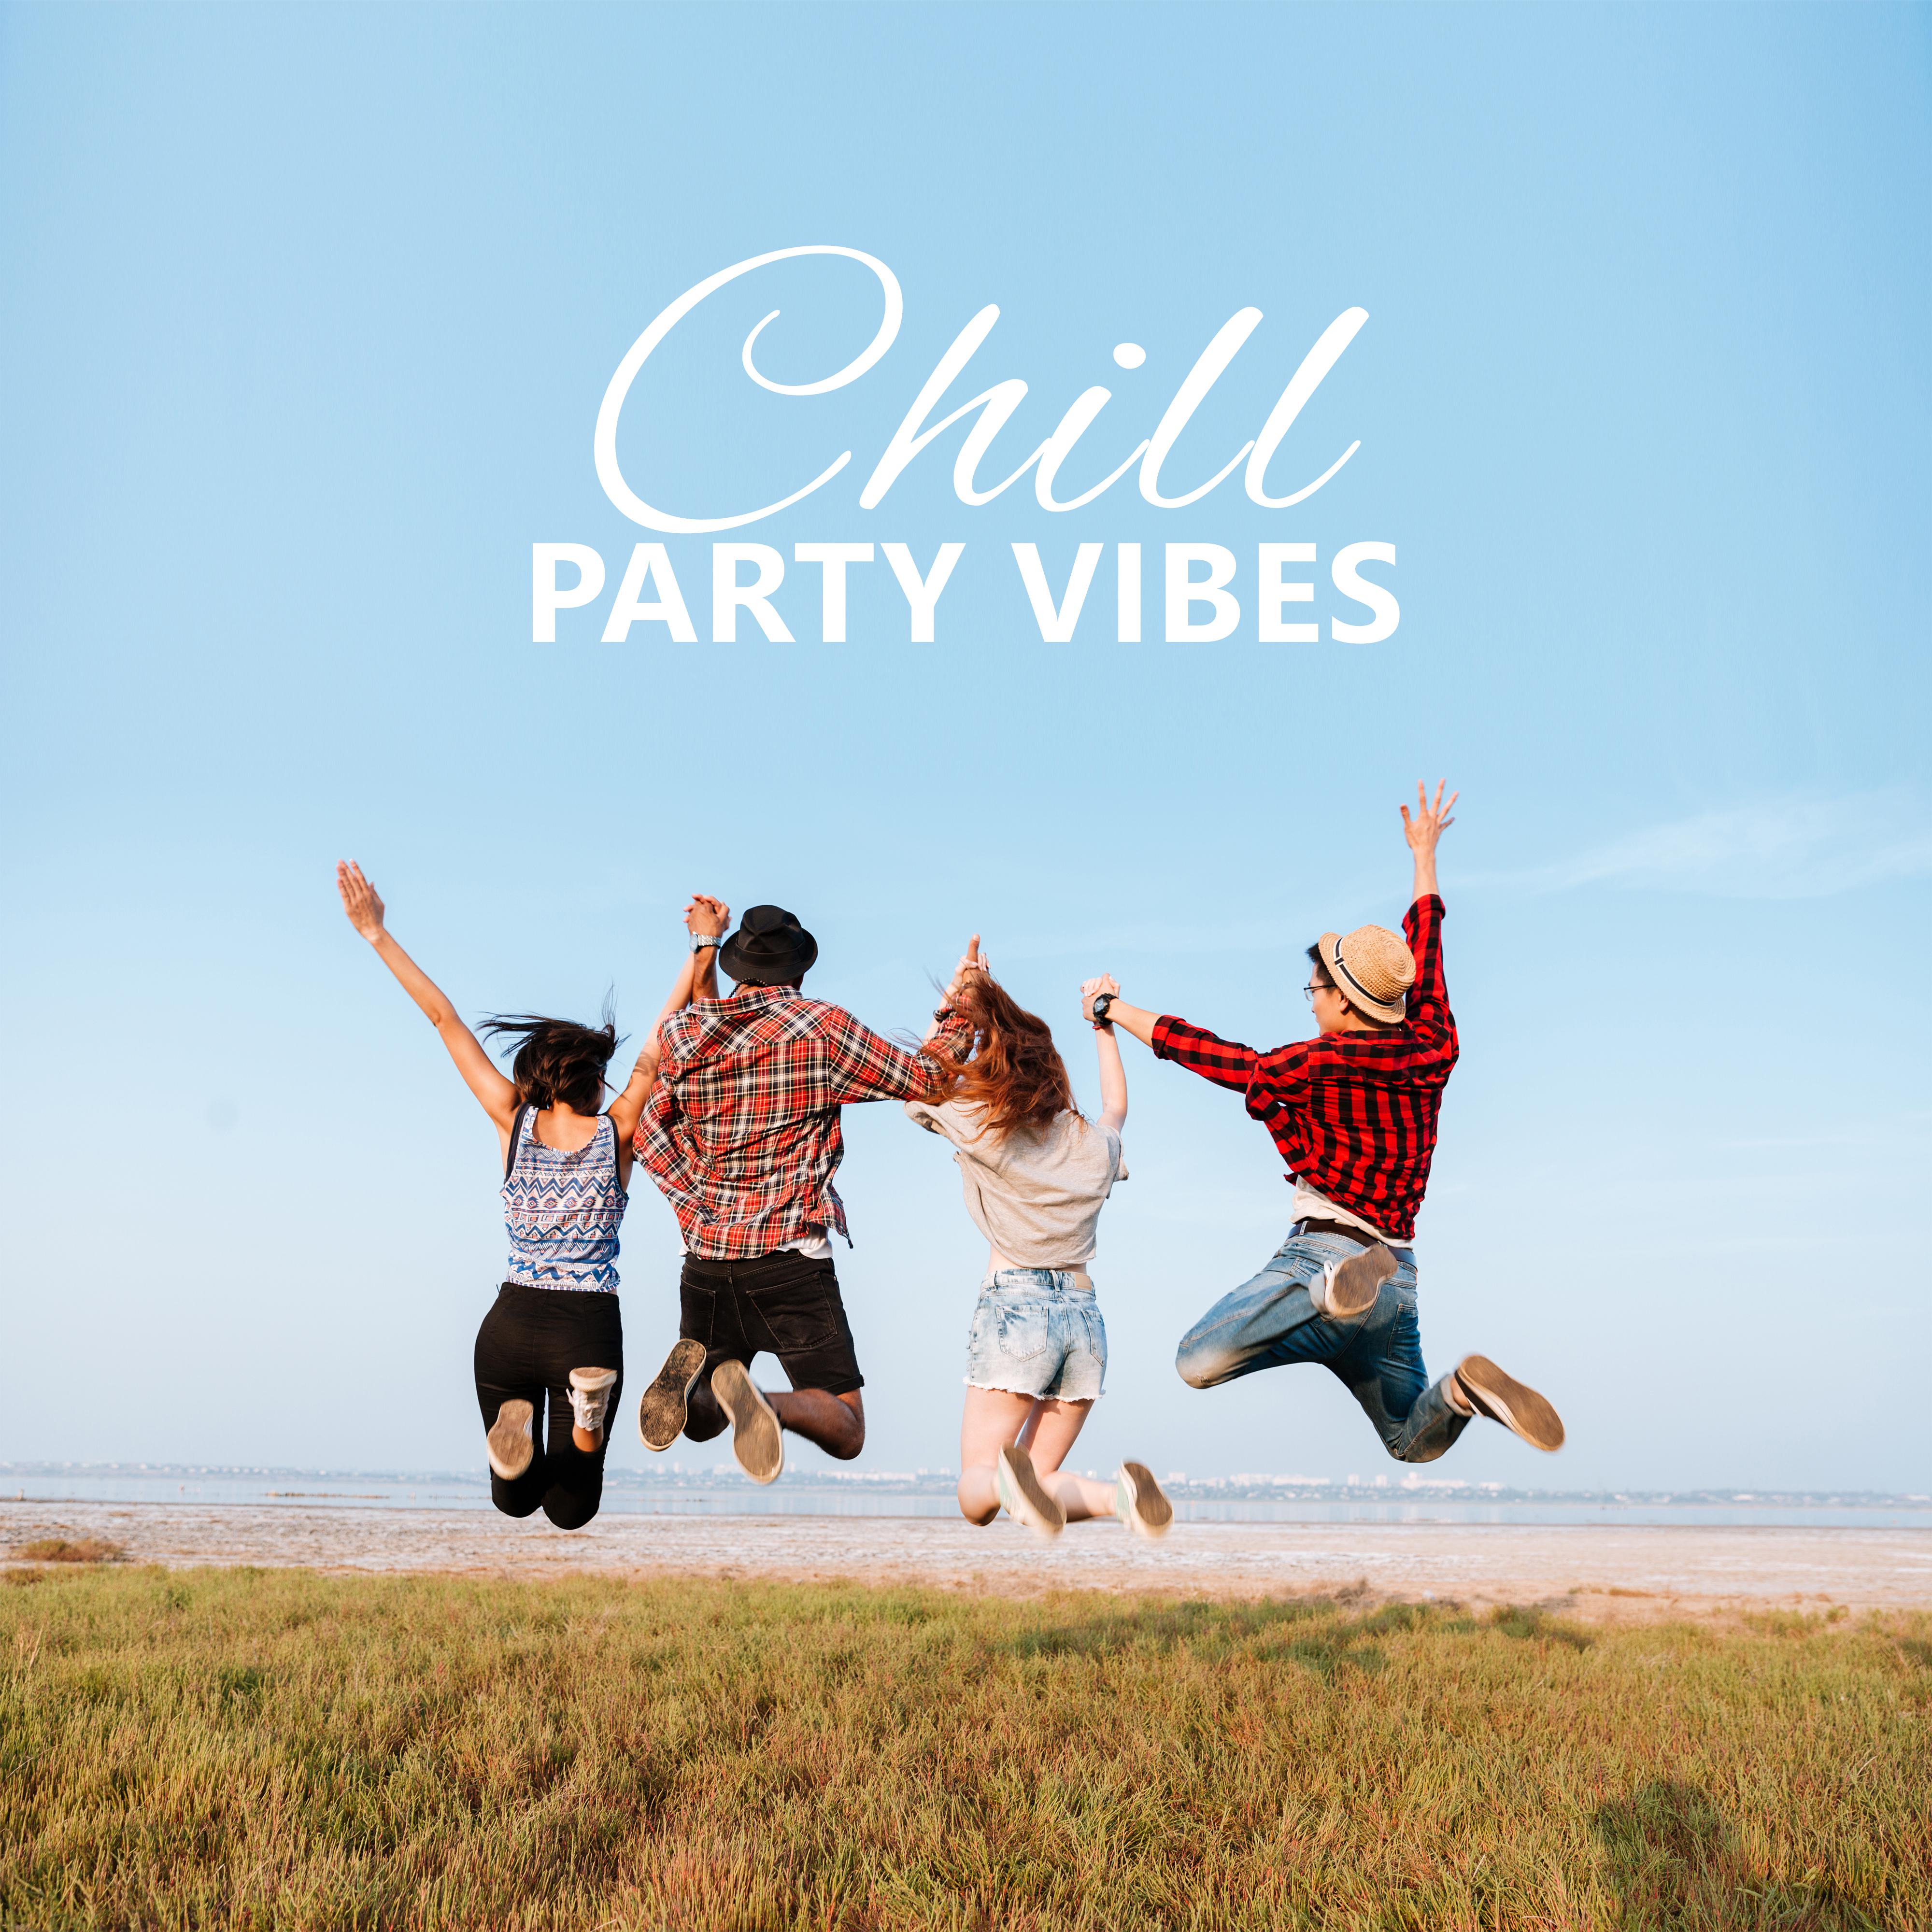 Chill Party Vibes – Ibiza Music, Beach Party Sounds, Cocktails & Drinks